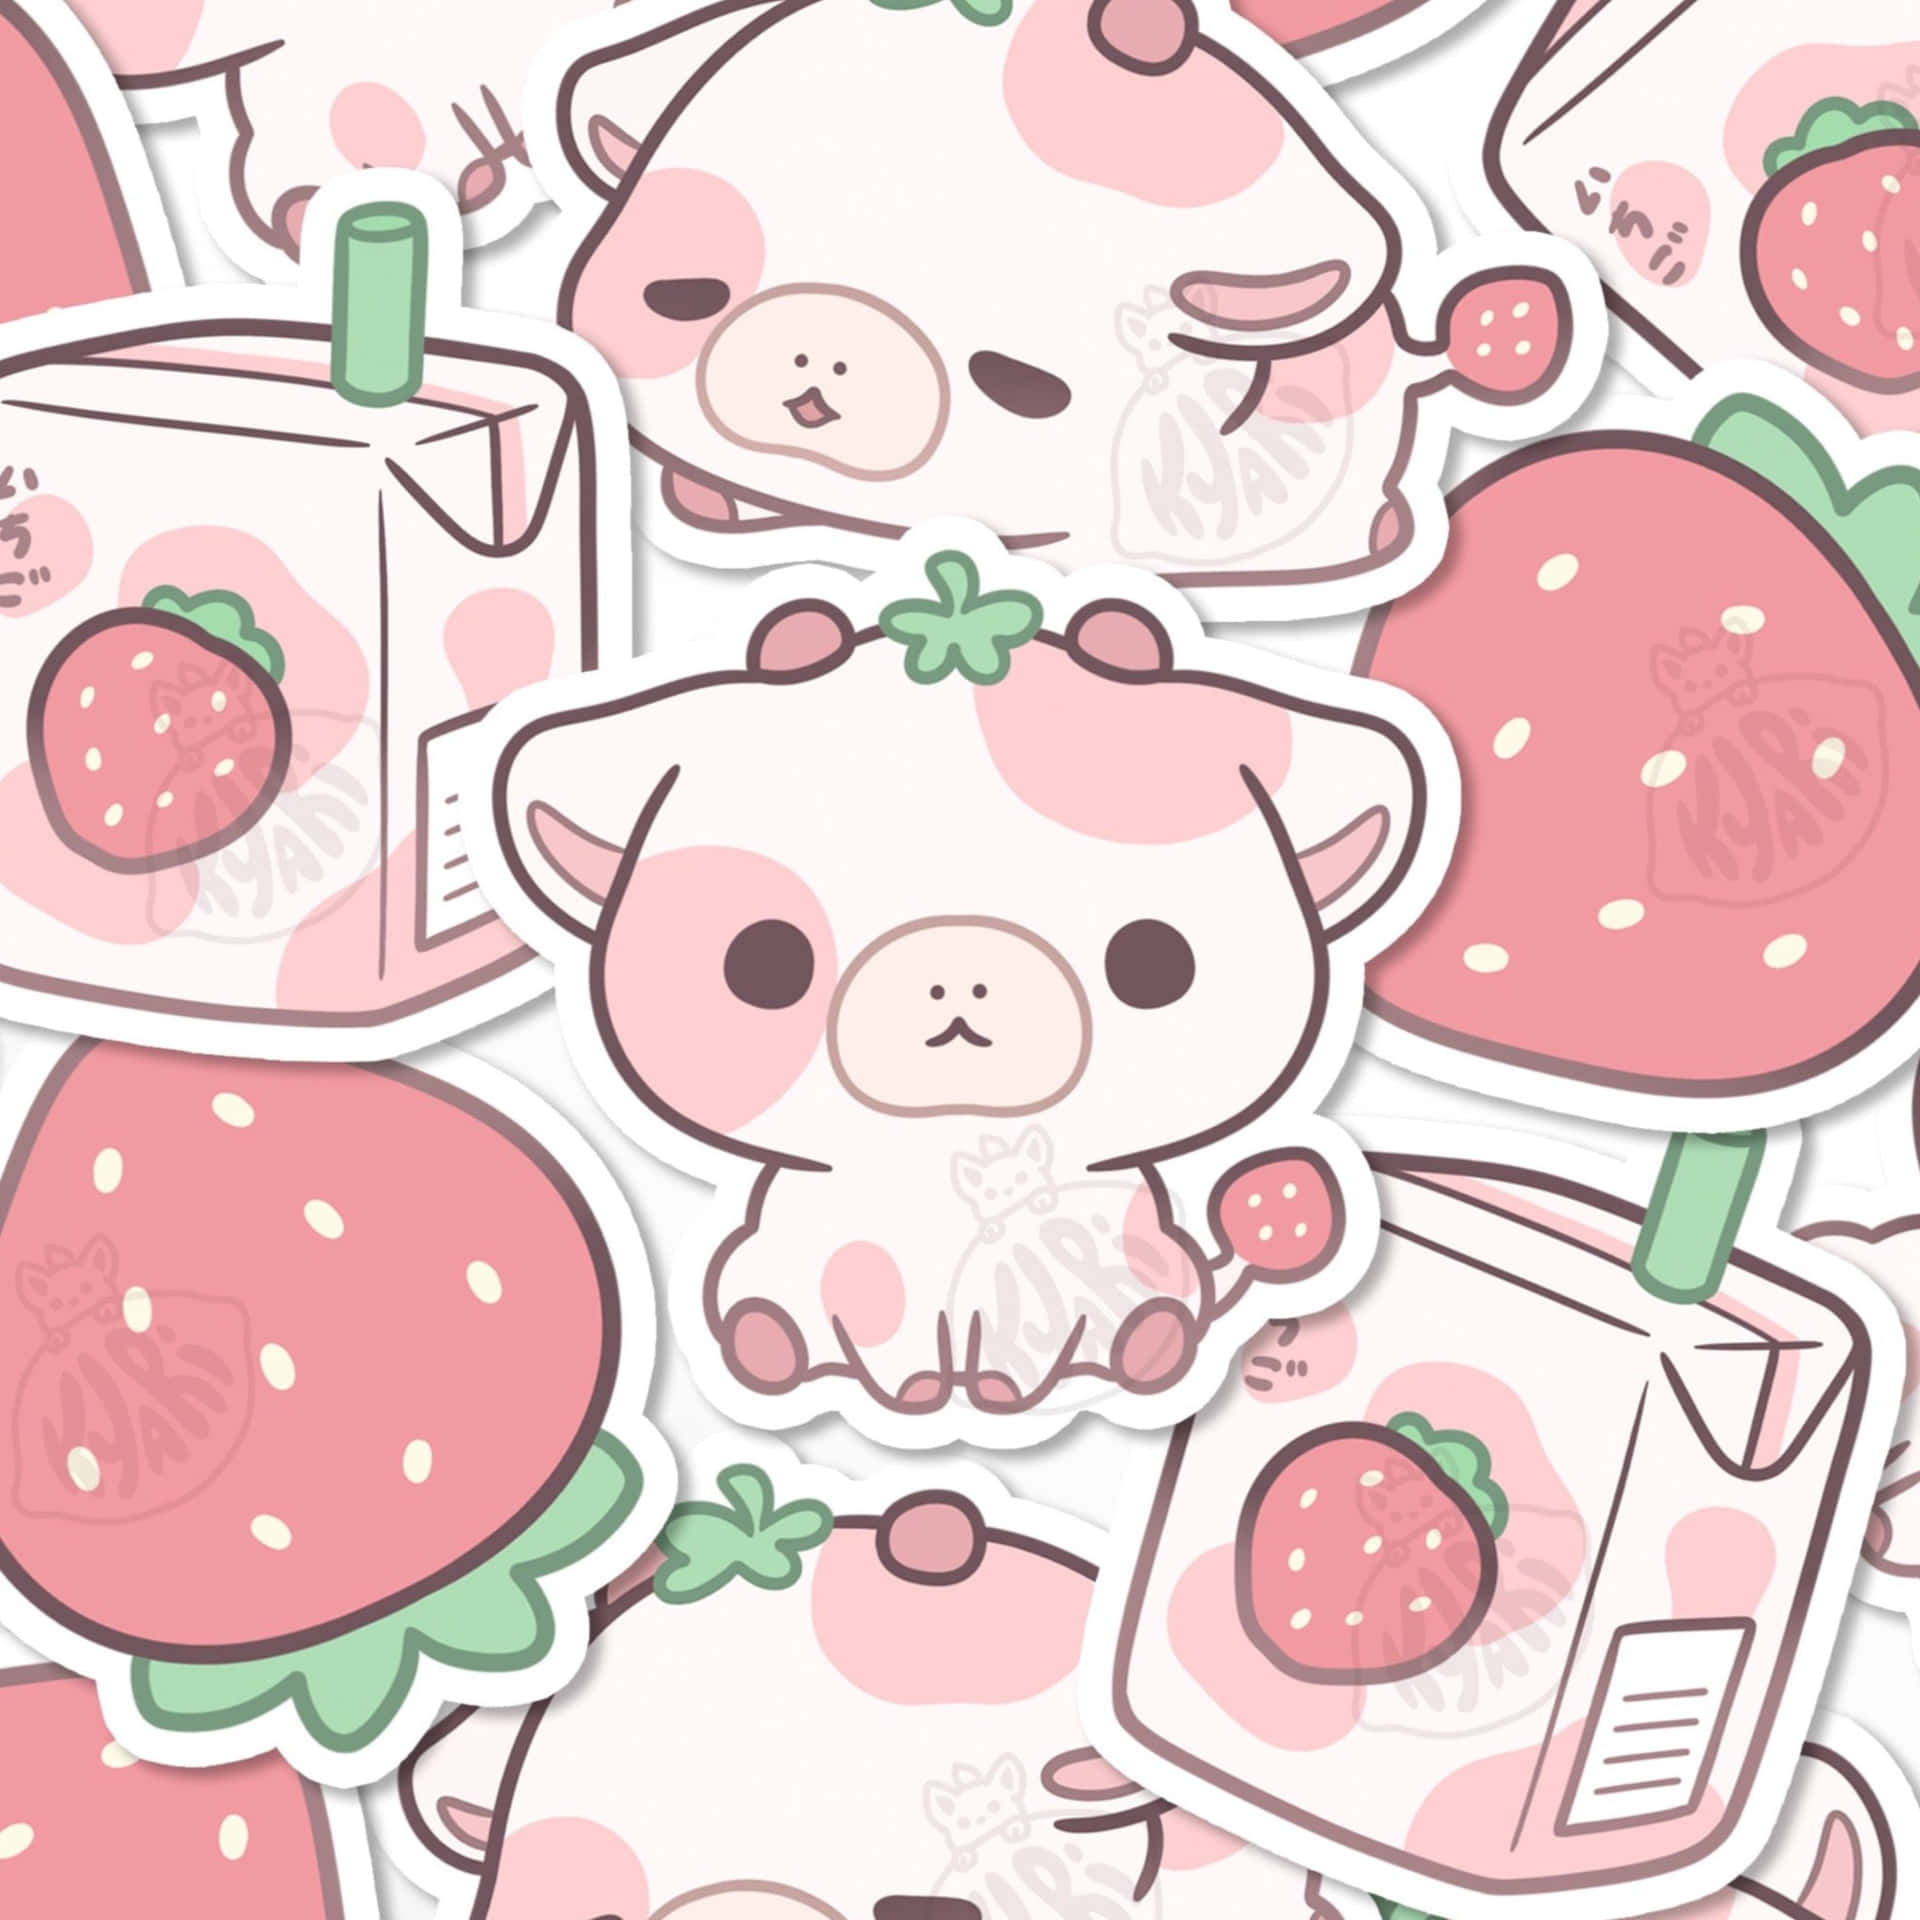 Caption: Adorable Strawberry Cow lounging in a lush meadow